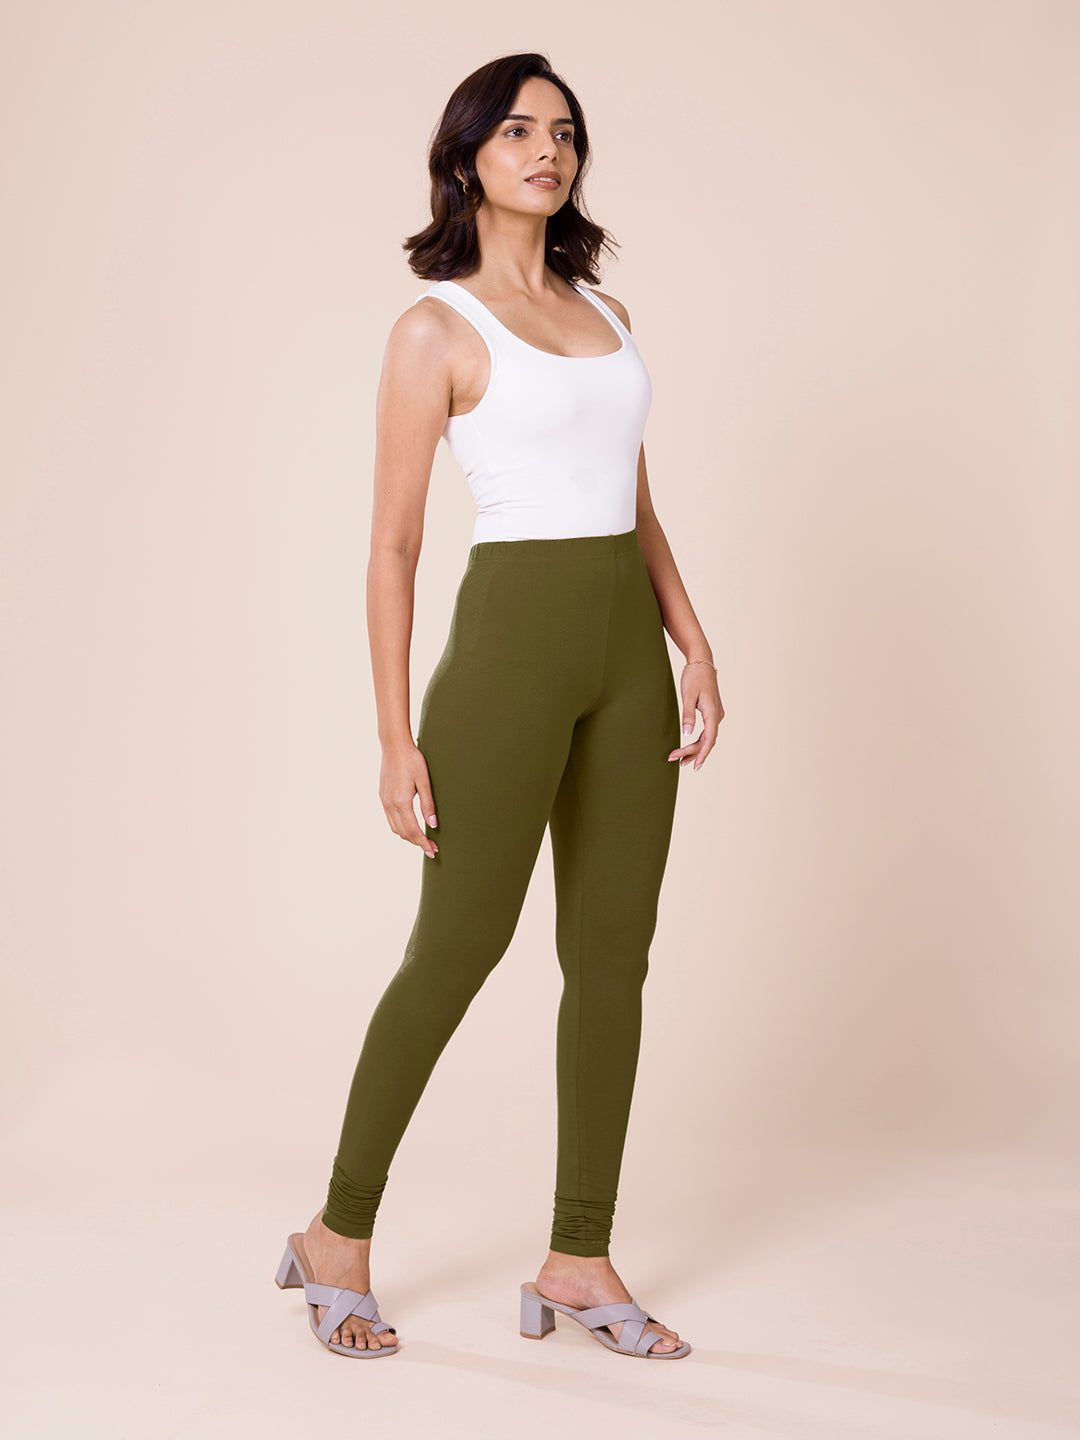 Cotton rich leggings COLOUR olive - RESERVED - 1480I-91X